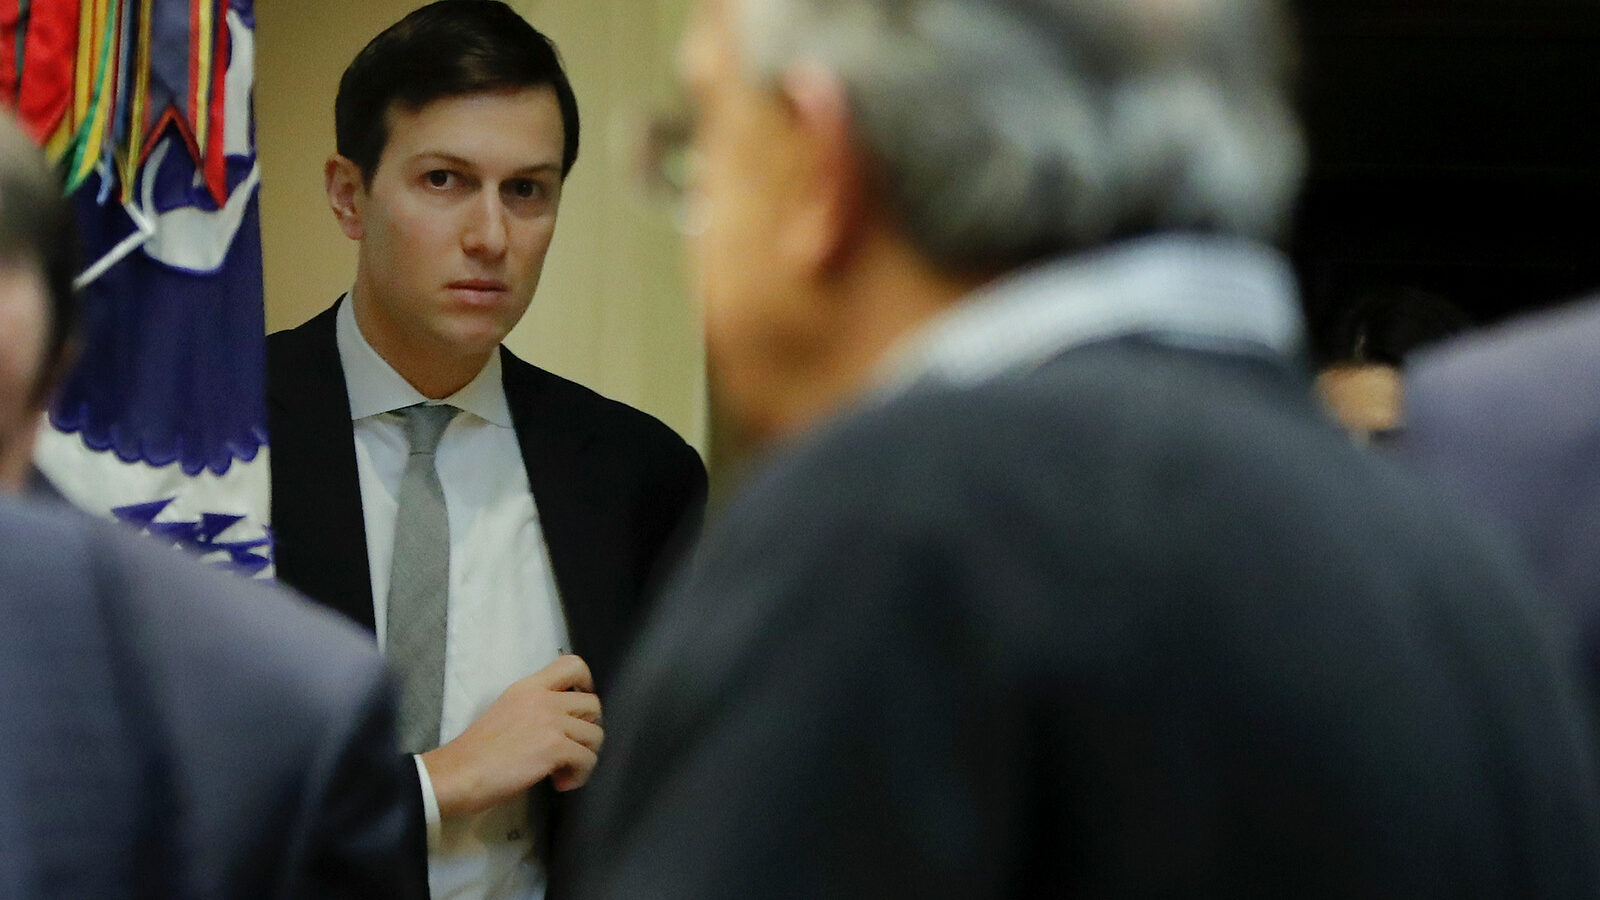 White House Senior Adviser Jared Kushner arrives for a meeting between President Donald Trump and automobile leaders in the Roosevelt Room of the White House in Washington, Tuesday, Jan. 24, 2017. (AP/Pablo Martinez Monsivais)